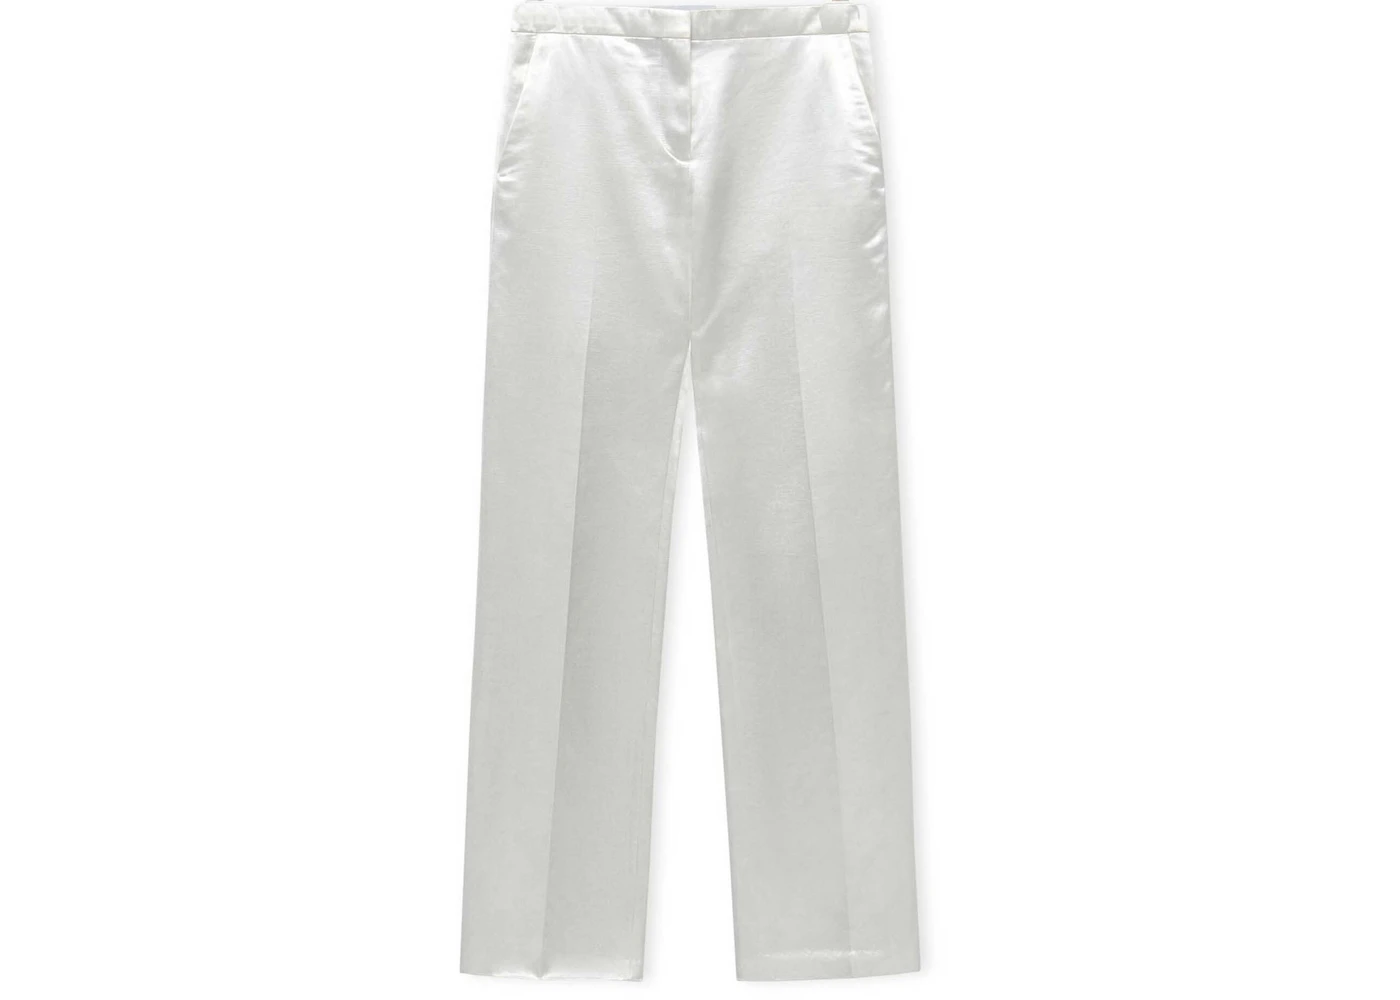 LOEWE Tailored Trousers in Cotton Satin Ivory - US